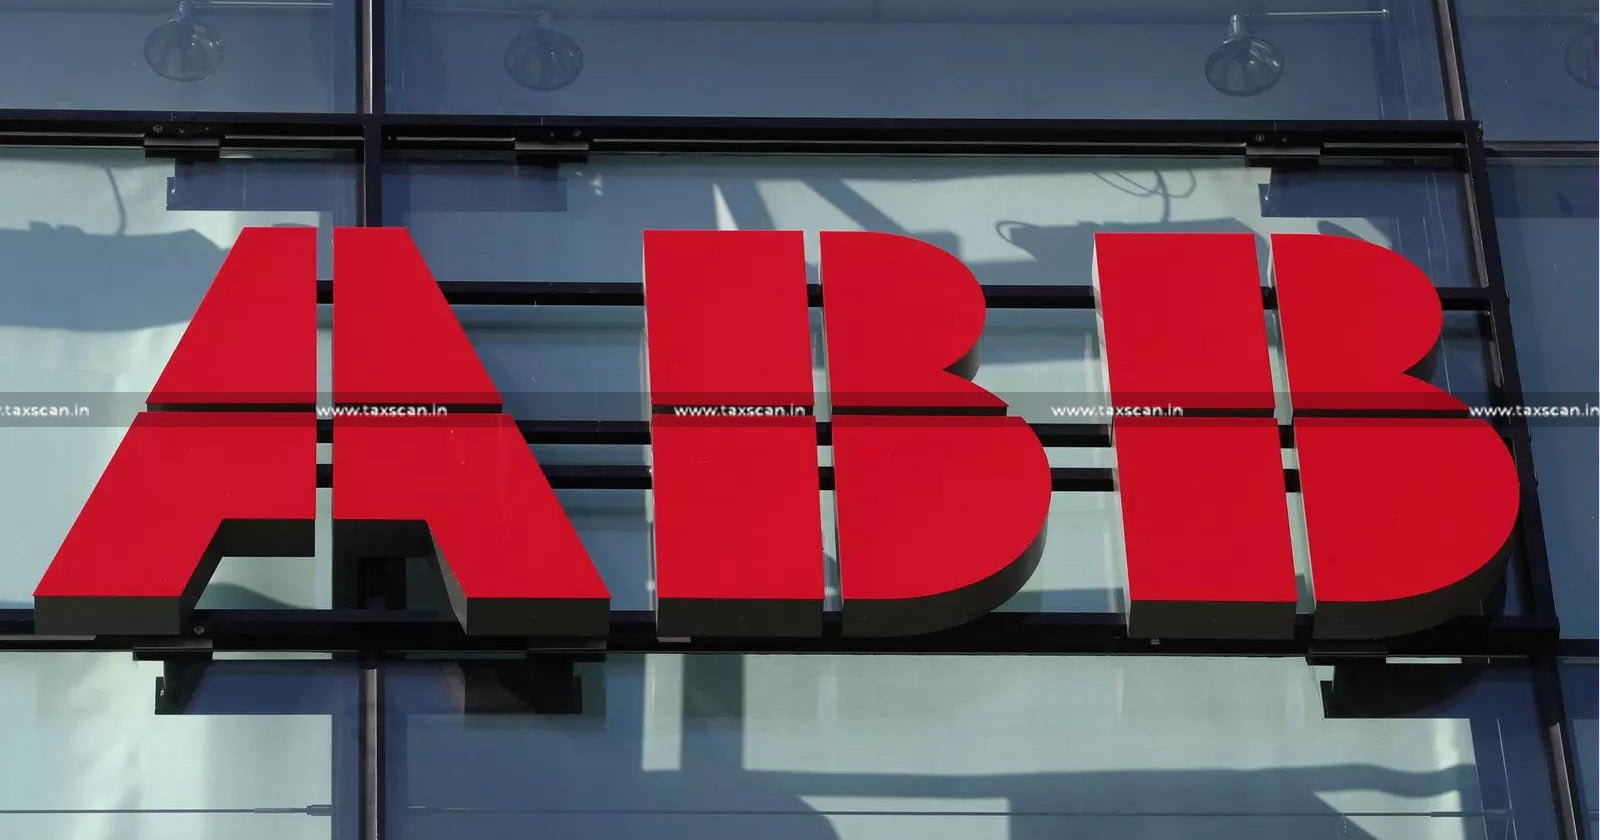 Finance Analyst Position at ABB - Finance Analyst - ABB - Master’s Graduates in Accounting - Accounting - Finance - Commerce - taxscan